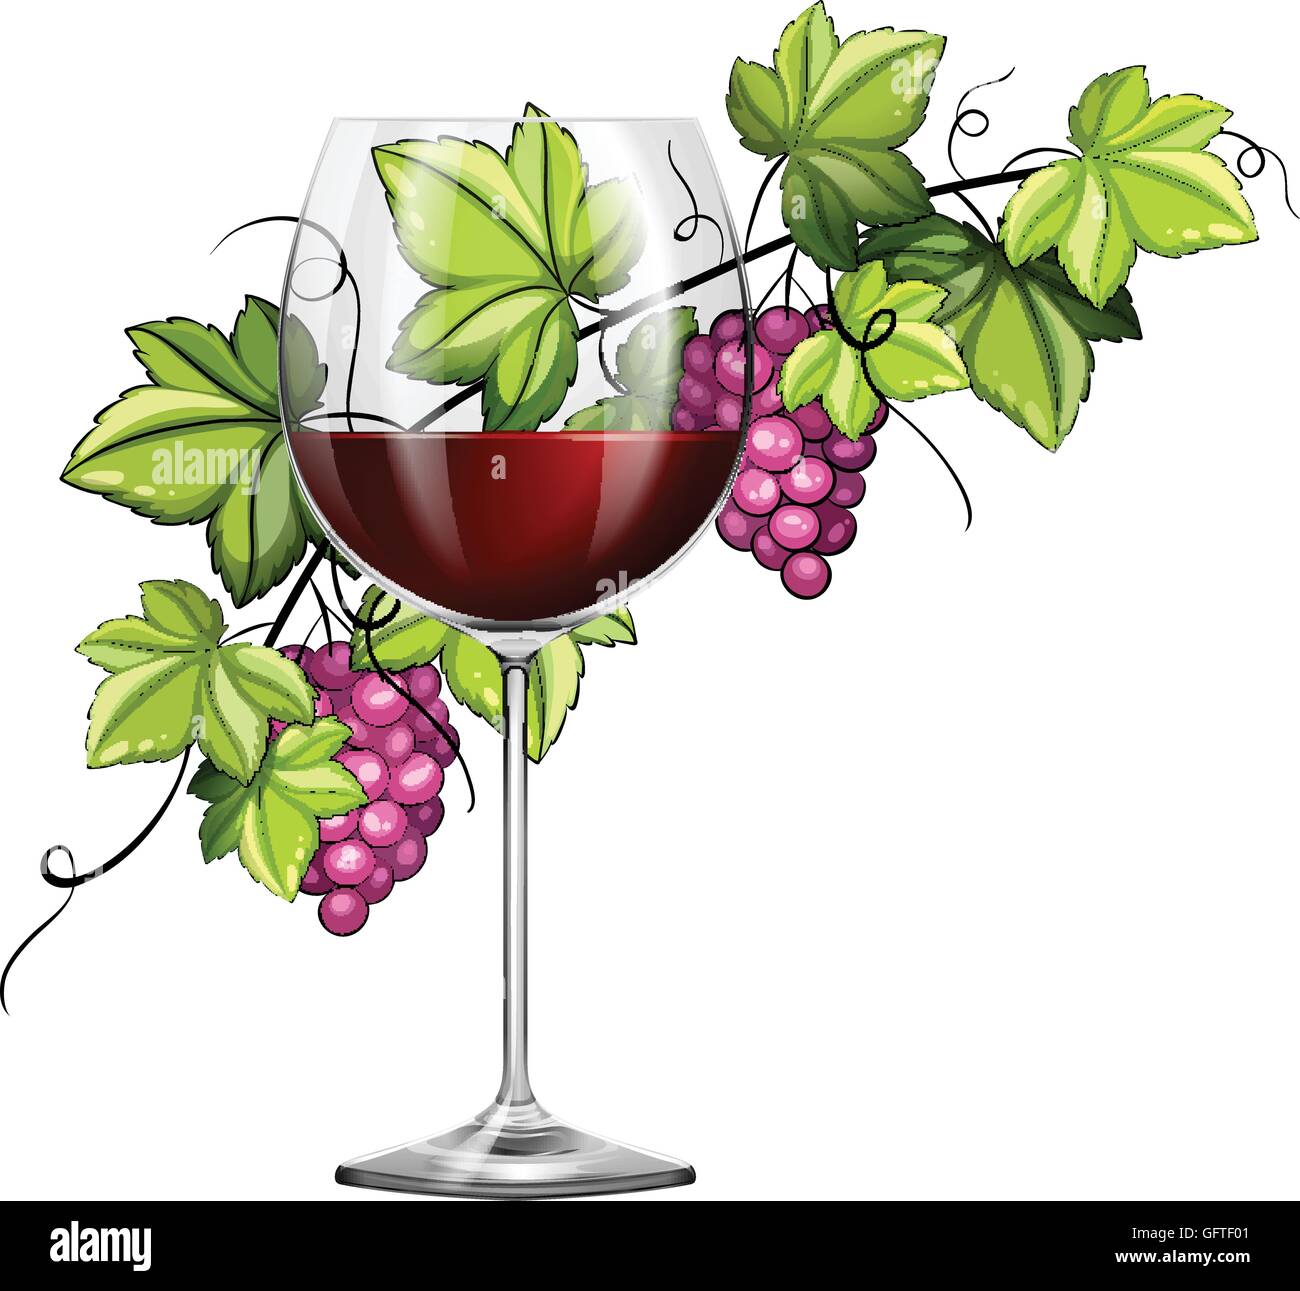 https://c8.alamy.com/comp/GFTF01/red-wine-in-glass-and-grapes-in-background-illustration-GFTF01.jpg